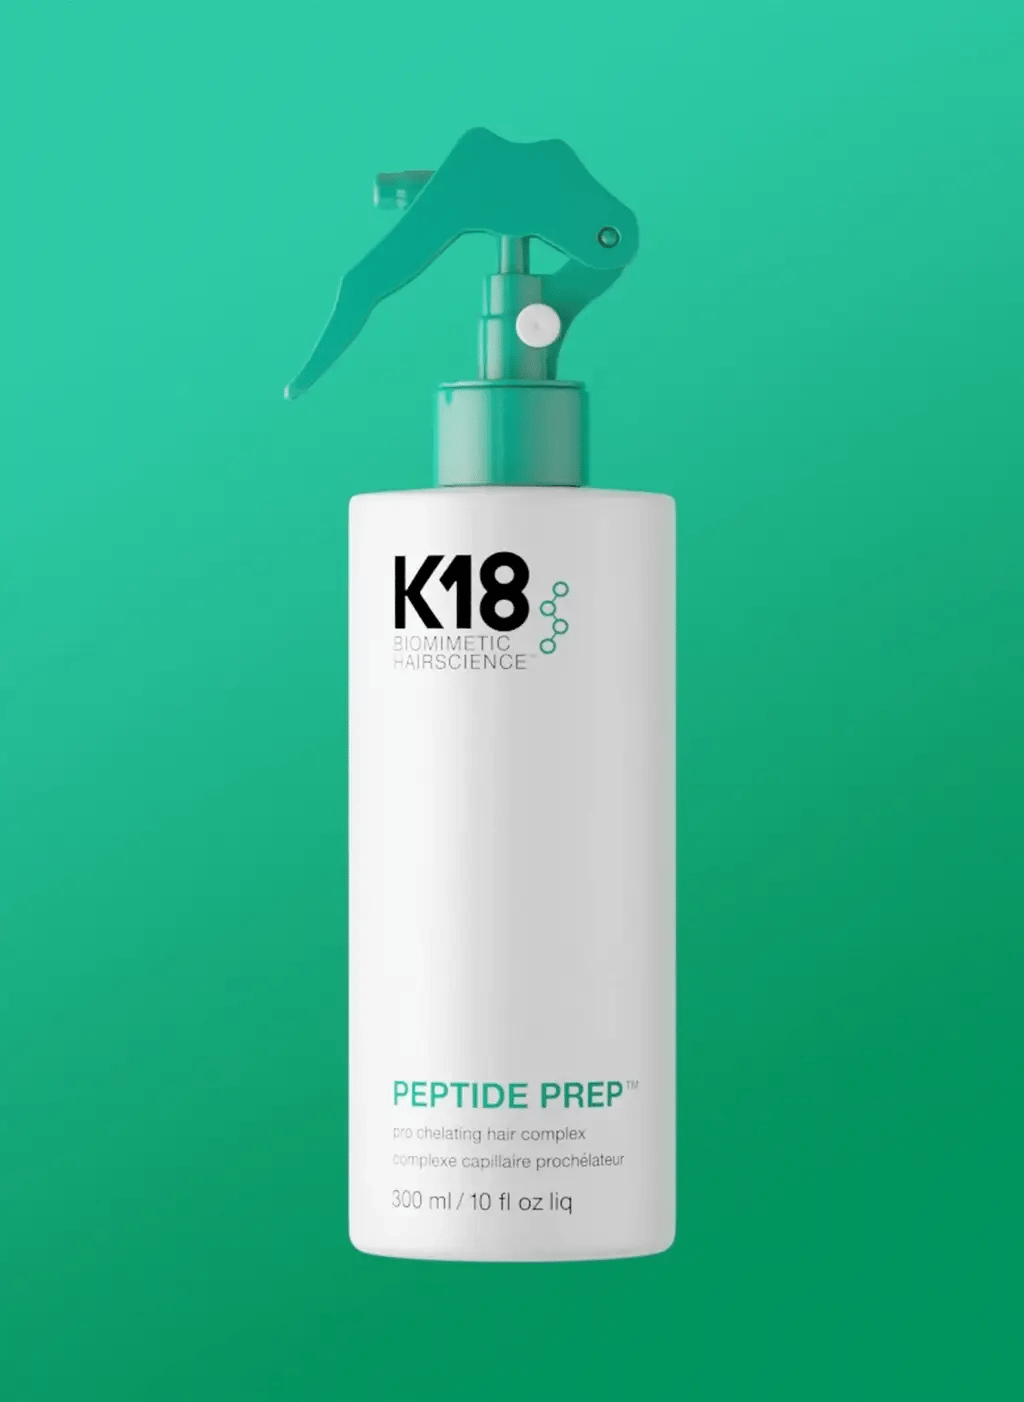 PEPTIDE PREP™ PRO chelating hair complex